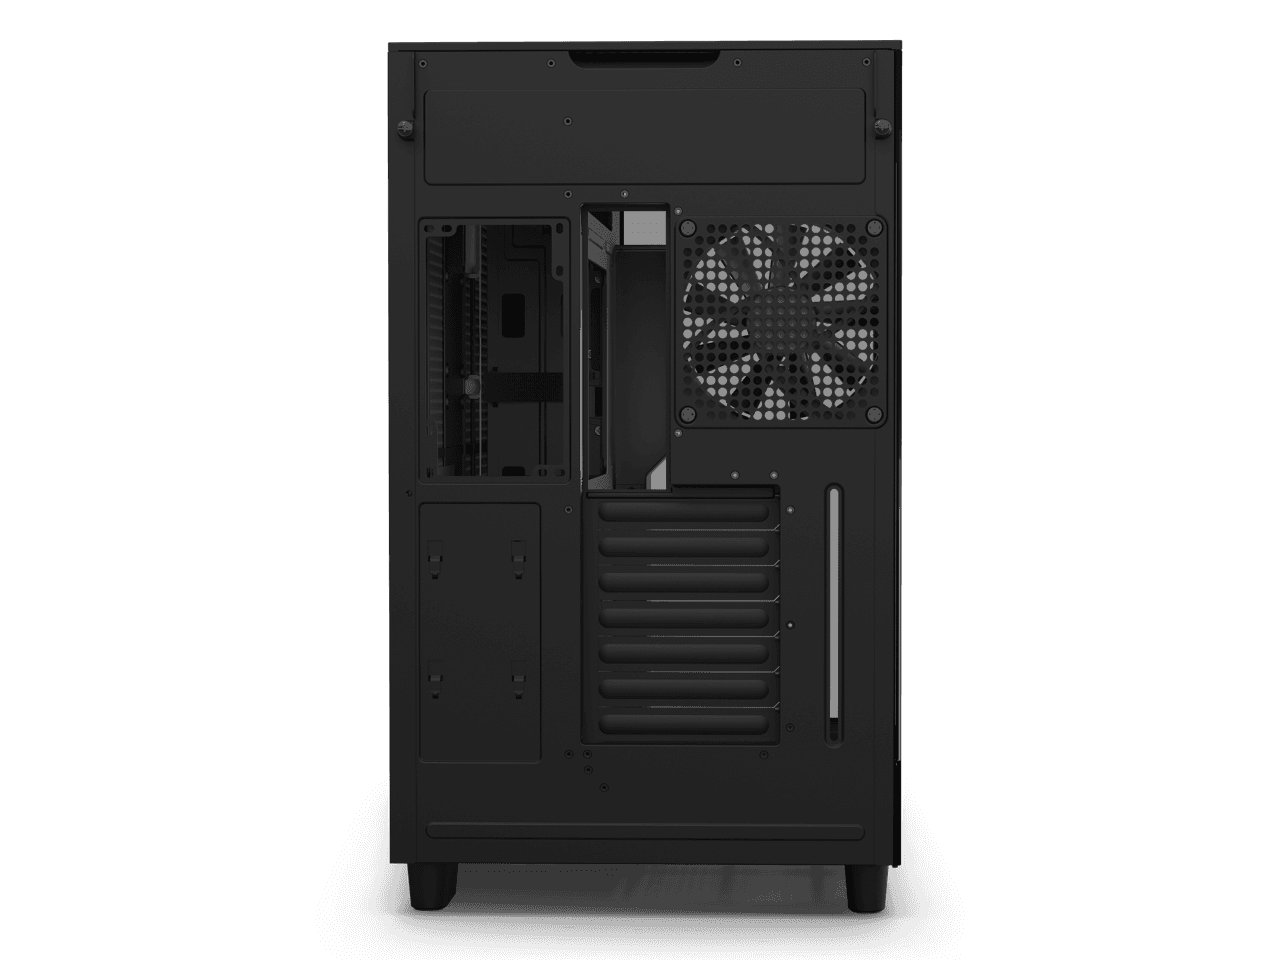 NZXT H7 Elite - Premium Mid-Tower PC Gaming Case - RGB LED & Smart Fan  Control - Tempered Glass - Black 